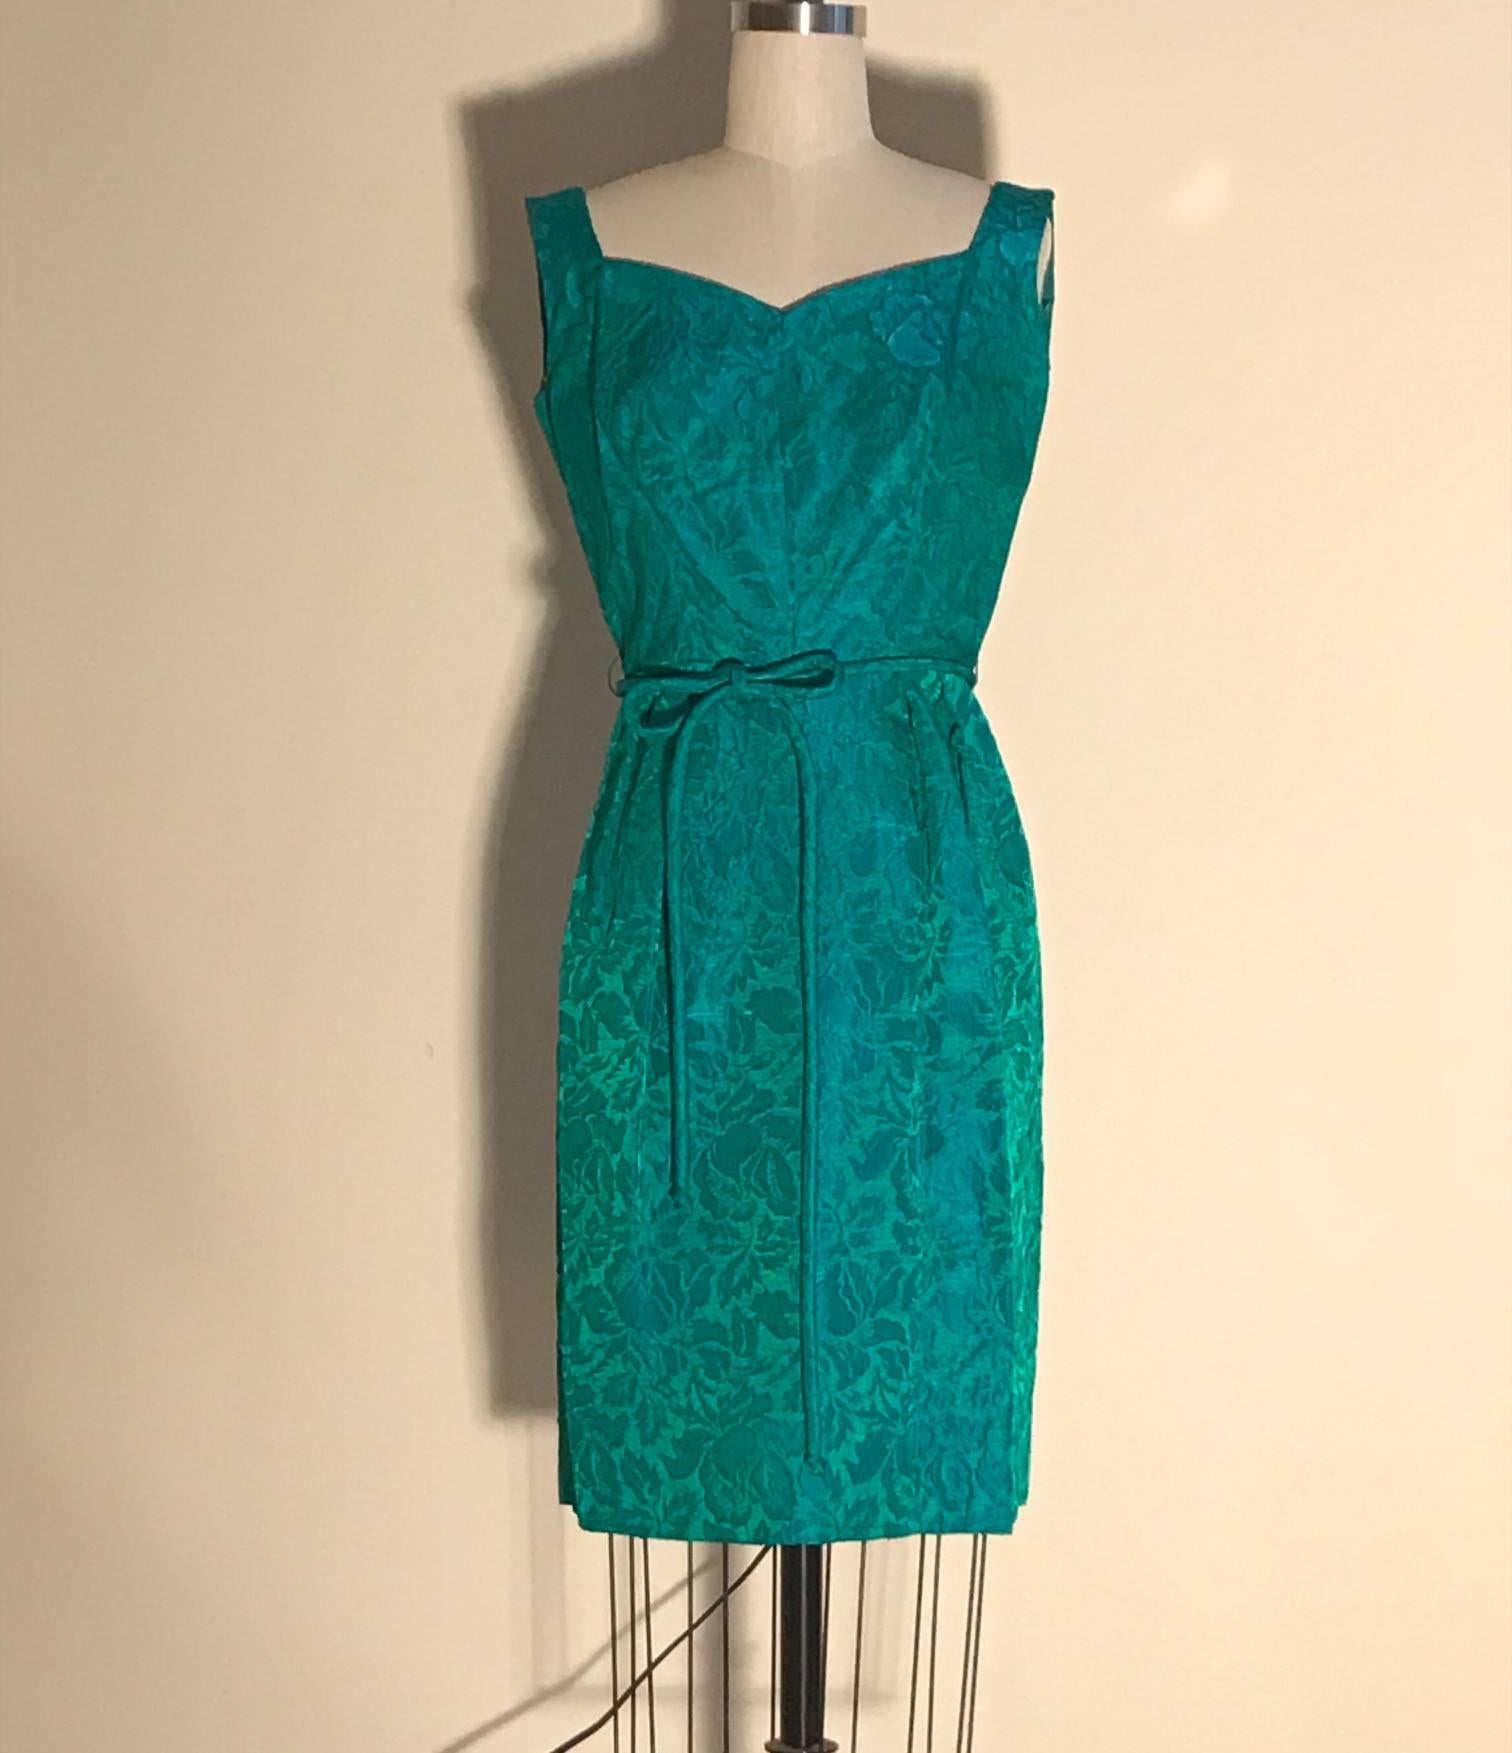 Joseph Magnin vintage 1950s blue and green floral jacquard shift dress in green with blue undertones. Tie belt at waist, back zip and hook. Short sleeve matching coat has high side slits/open sides with a single button closure and hook and eye at